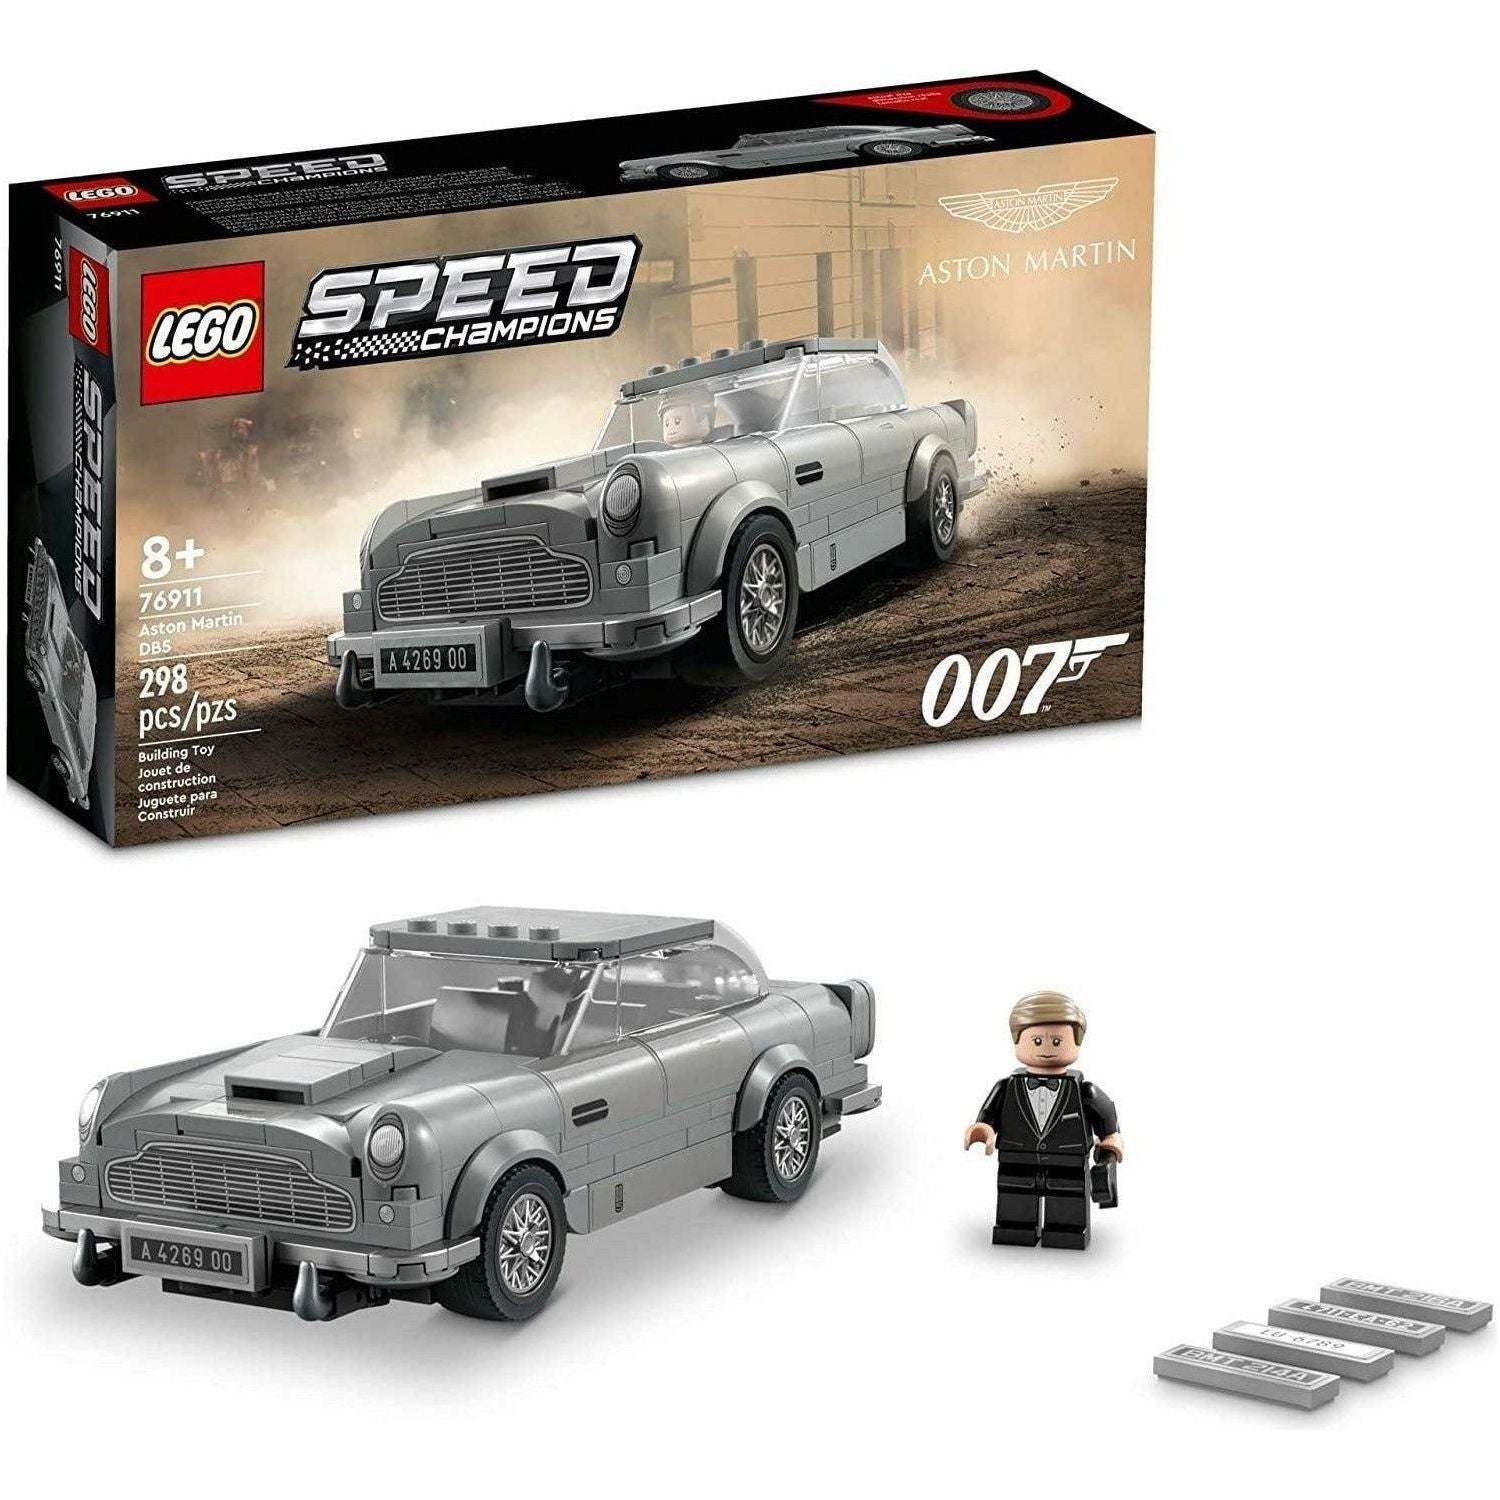 LEGO Speed Champions 007 Aston Martin DB5 76911 Toy Building Set; James Bond Model (298 Pieces) - BumbleToys - 8+ Years, Boys, LEGO, OXE, Pre-Order, Speed Champions